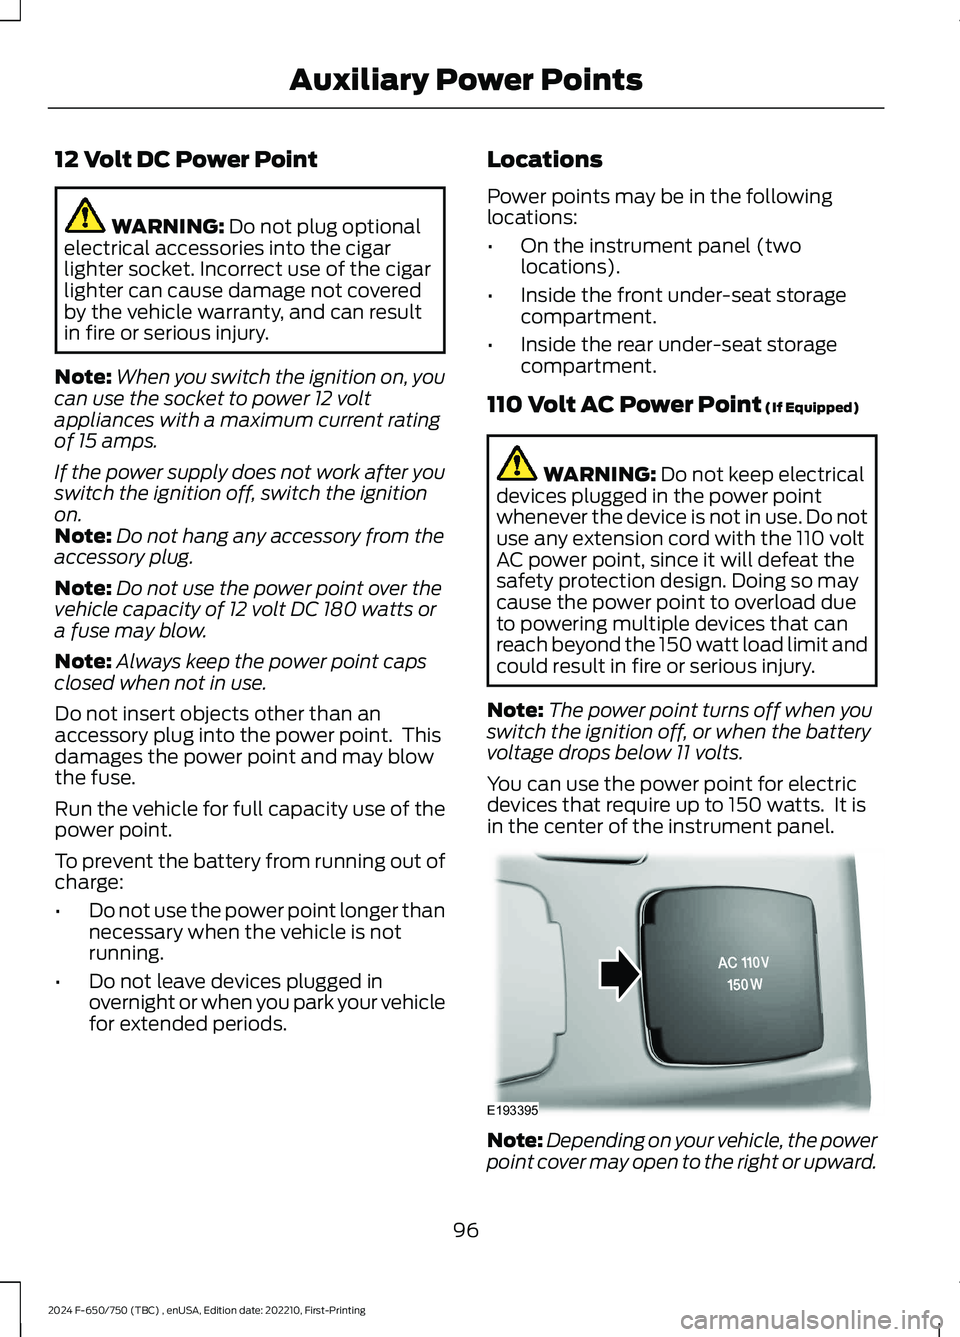 FORD F650/750 2024  Owners Manual 12 Volt DC Power Point
WARNING: Do not plug optionalelectrical accessories into the cigarlighter socket. Incorrect use of the cigarlighter can cause damage not coveredby the vehicle warranty, and can 